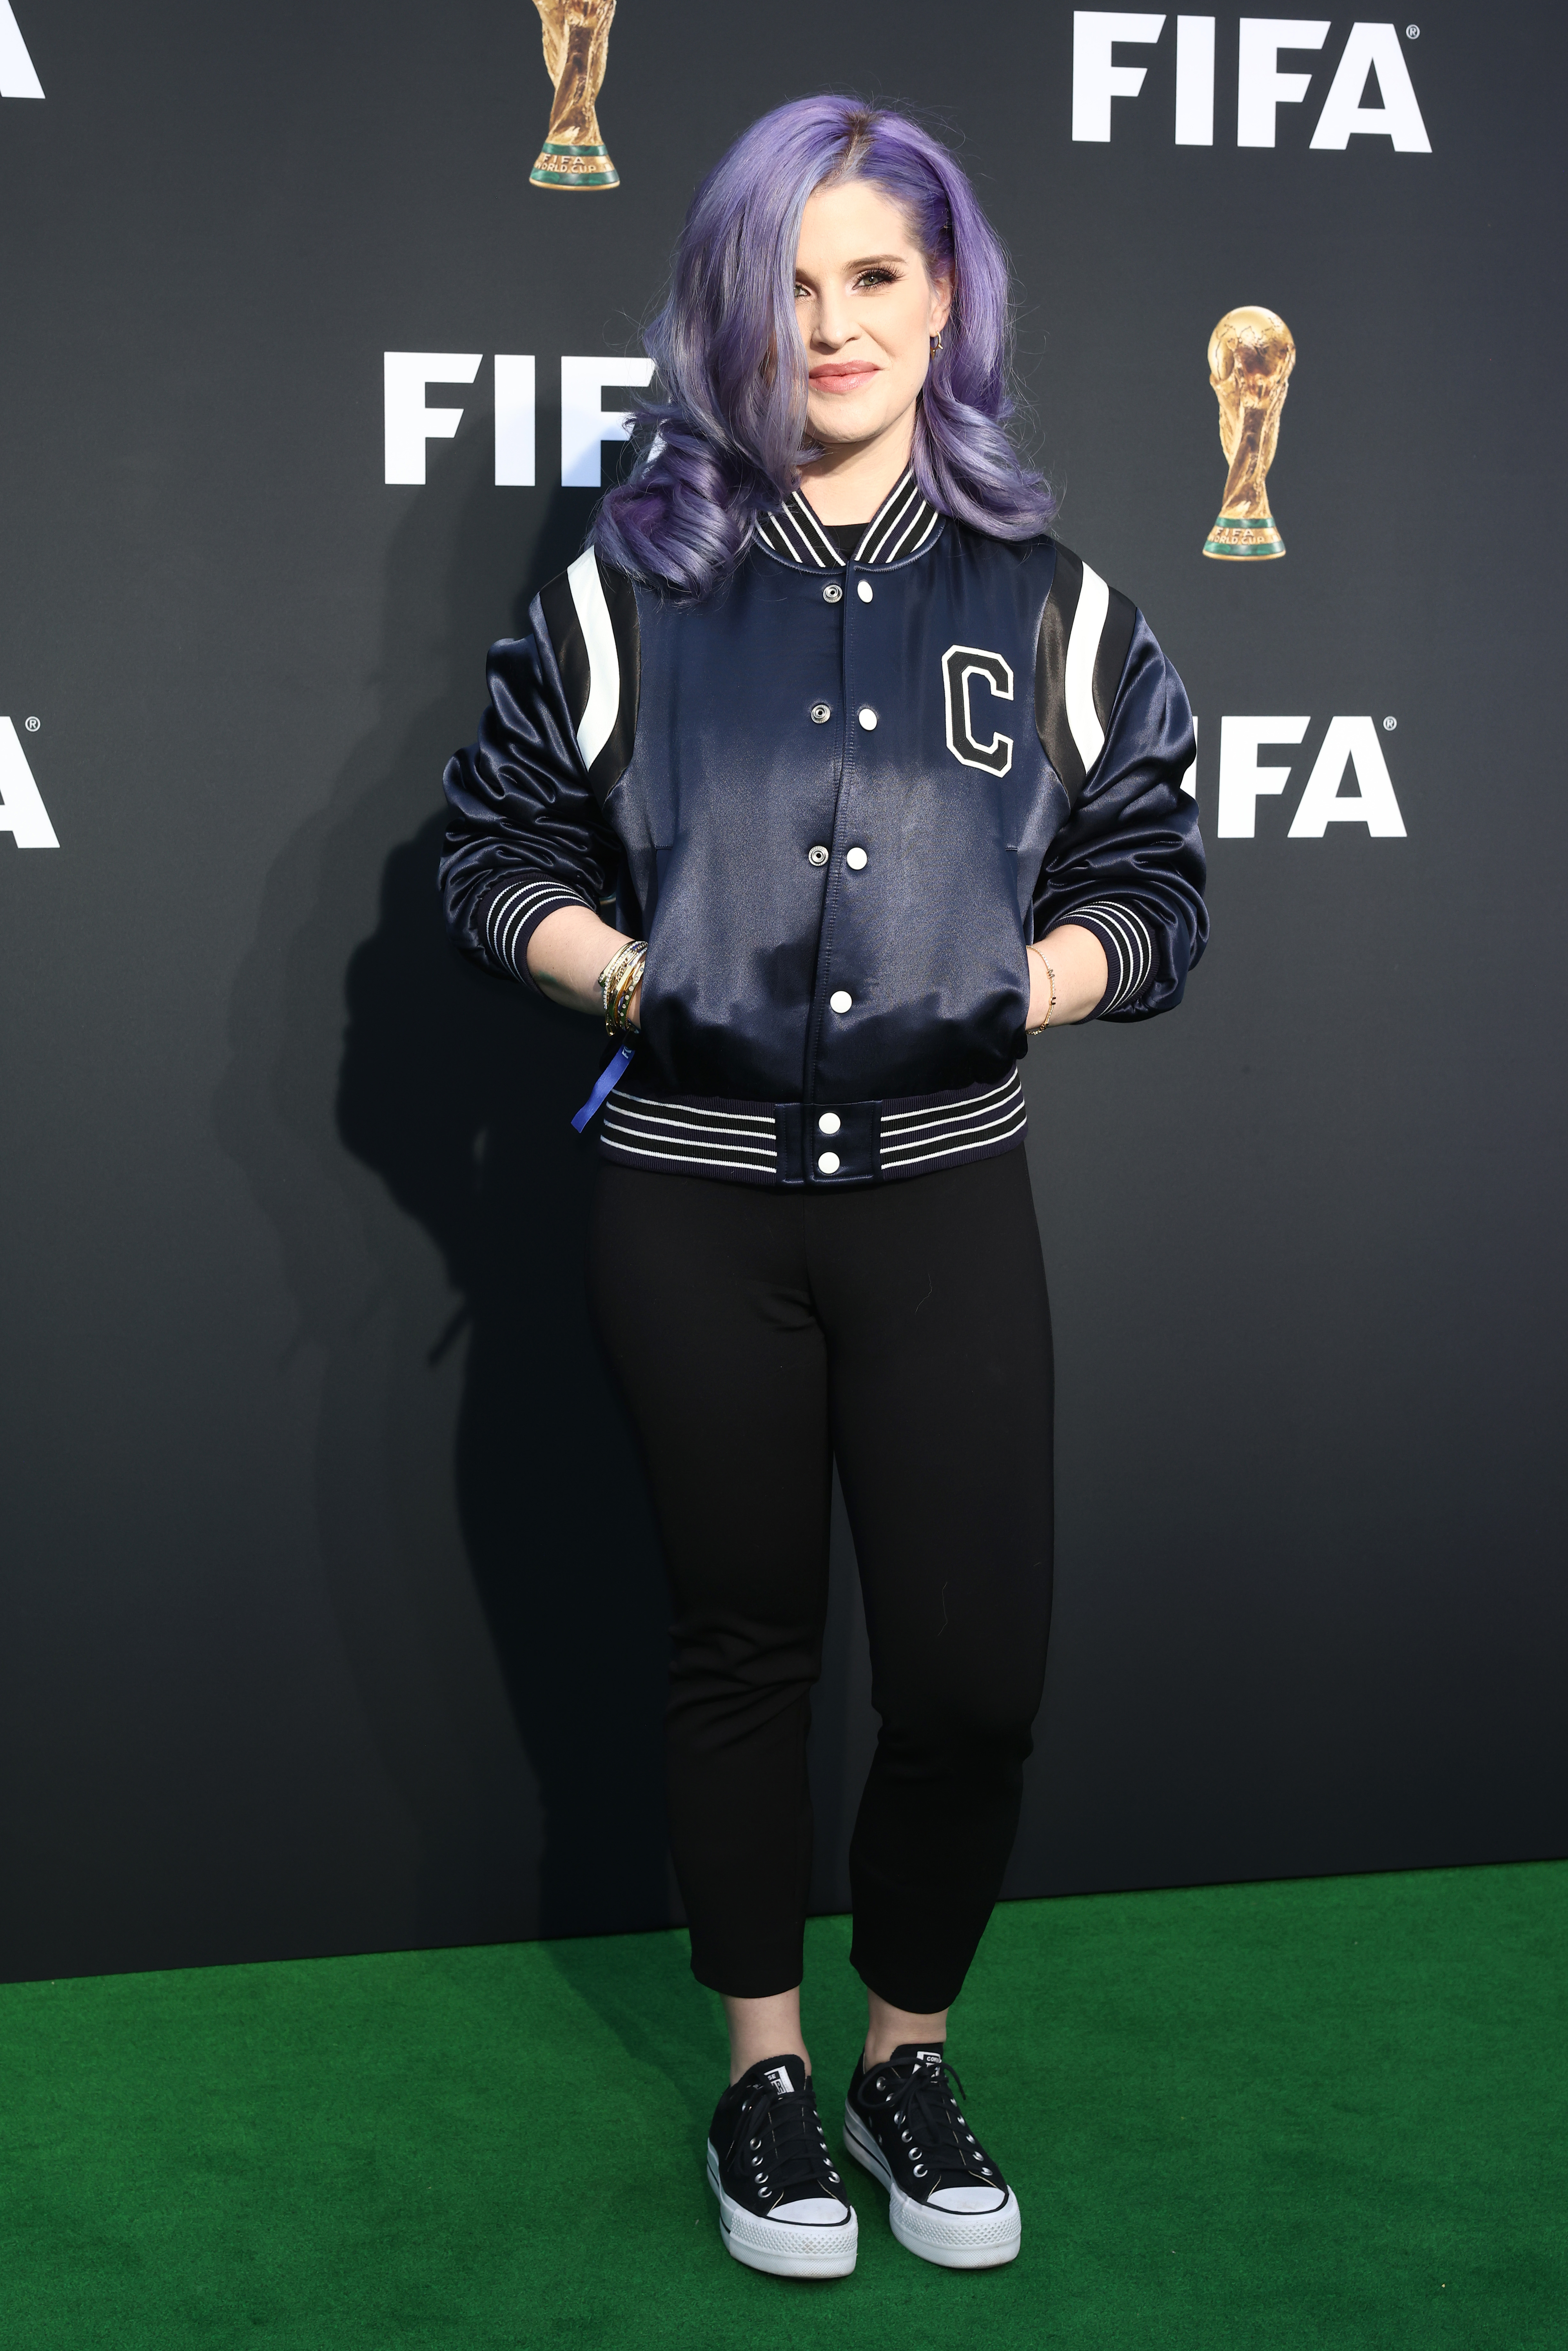 Kelly in a varsity jacket and pants standing on an event carpet